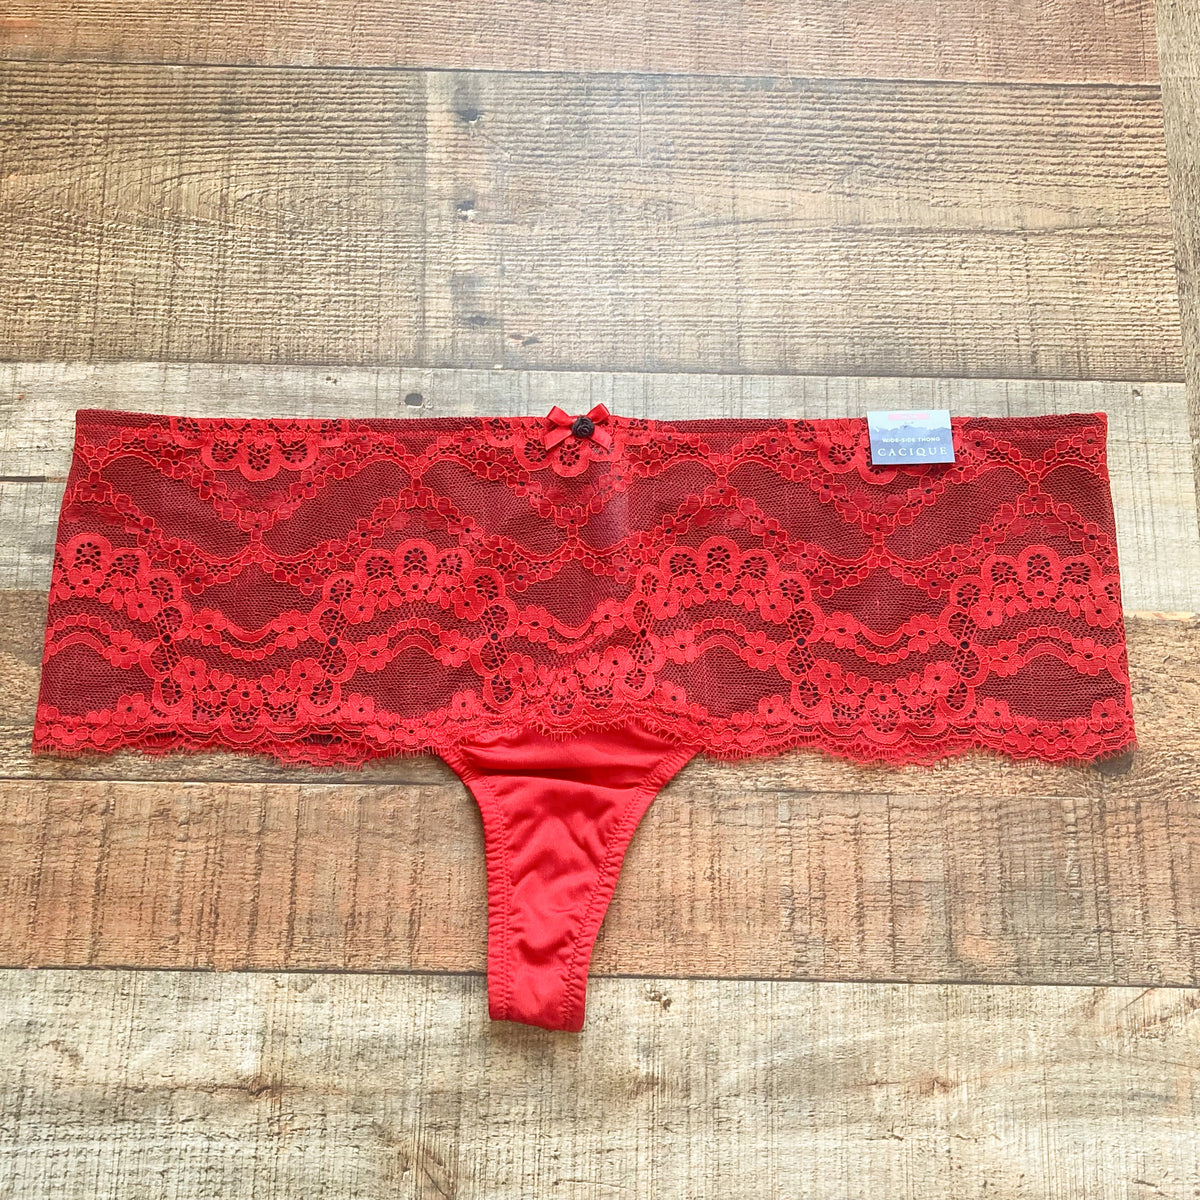 Cacique Red Lace Thong Underwear NWT- Size 14/16 (We have